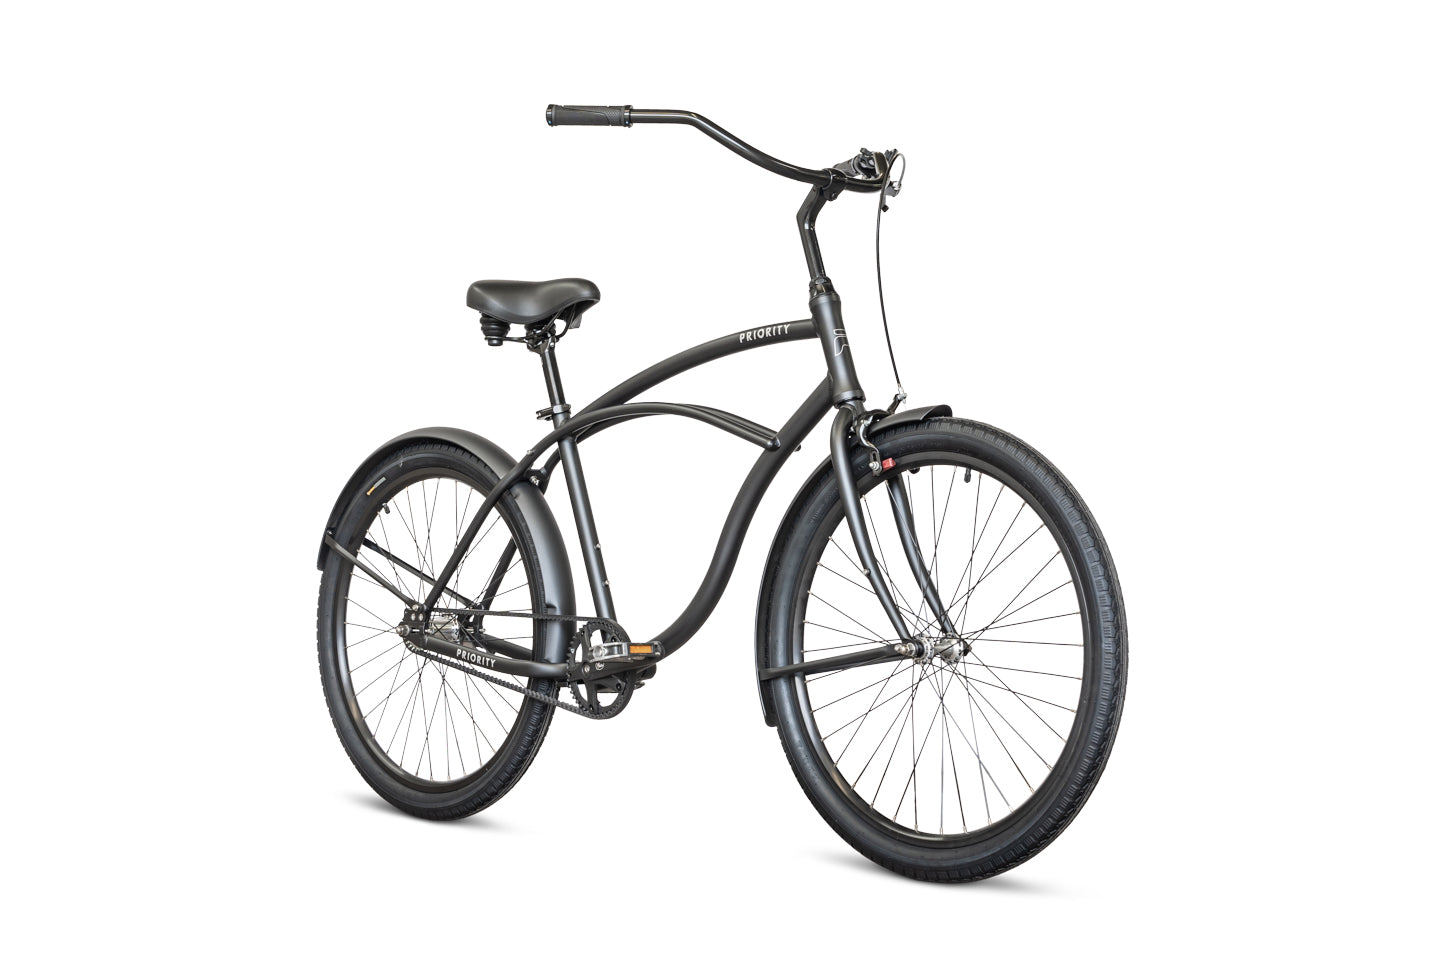 Priority Coast Bicycle in White